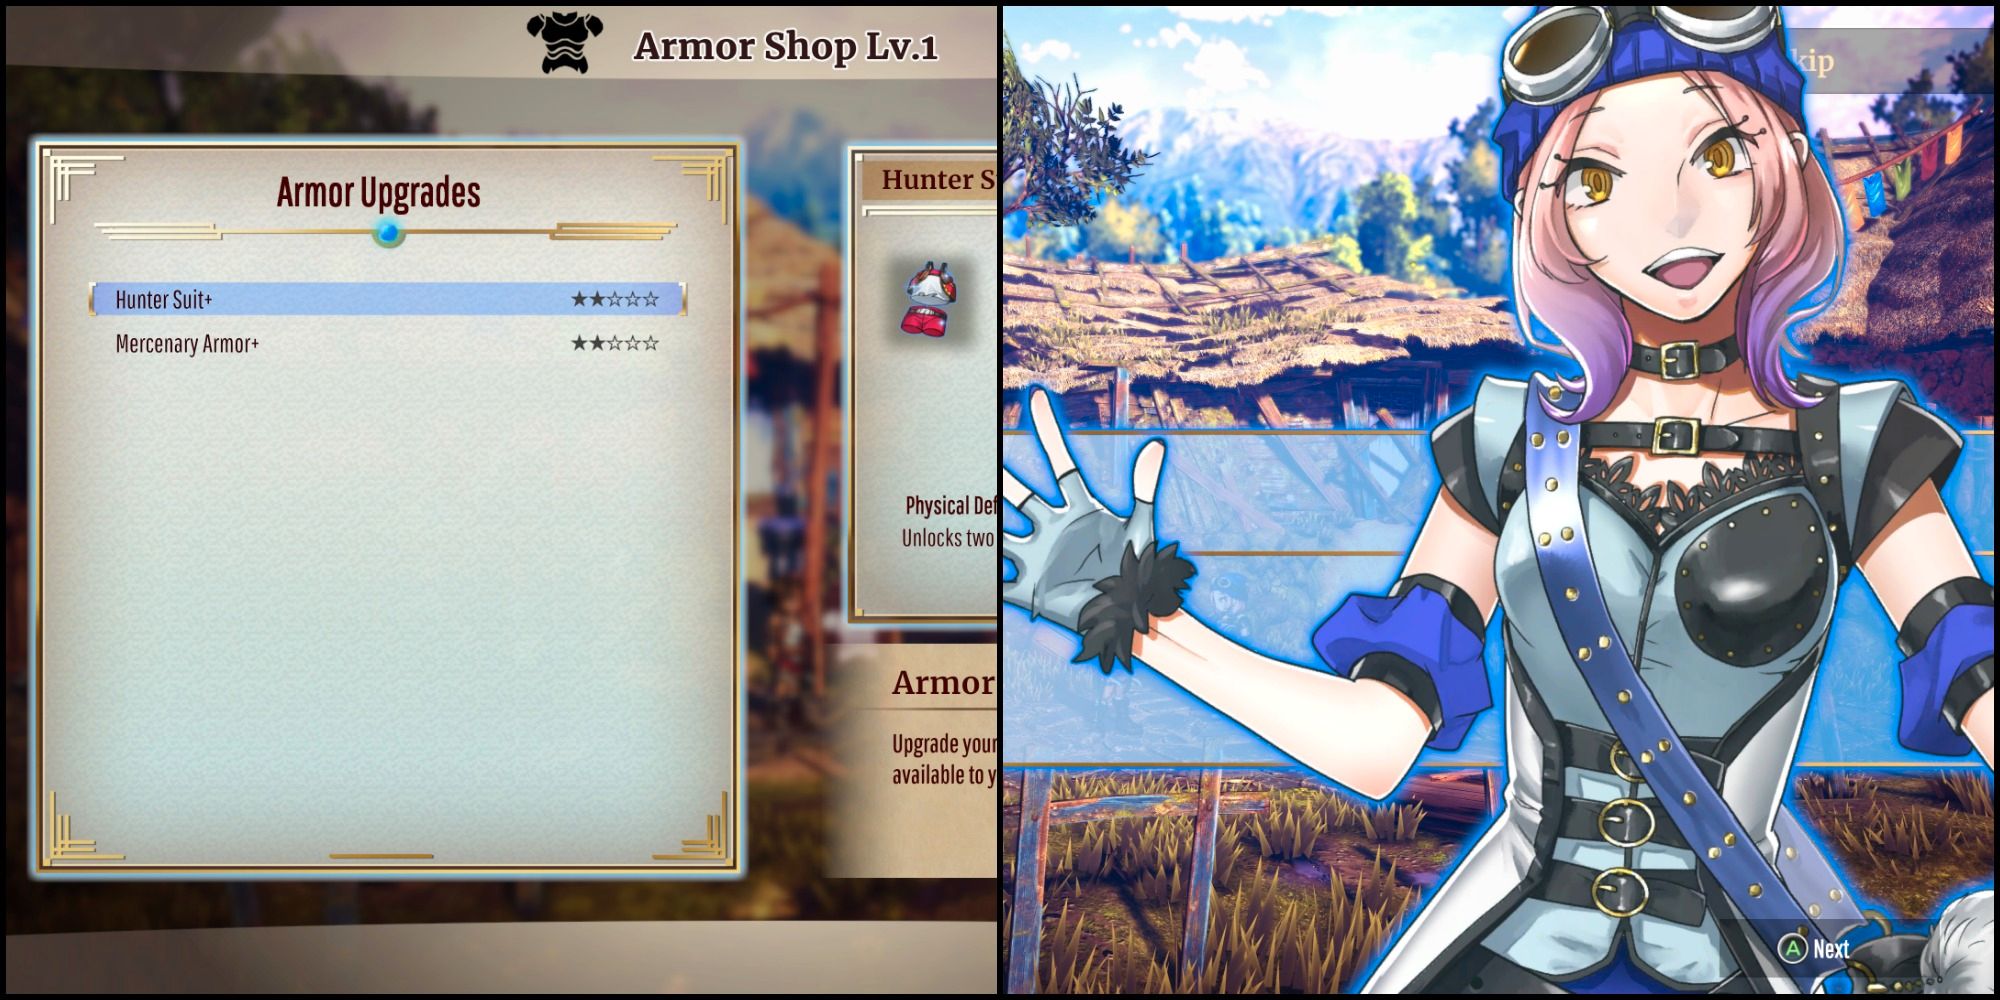 A split image of the Armor Shop menu and Frida's character screen.